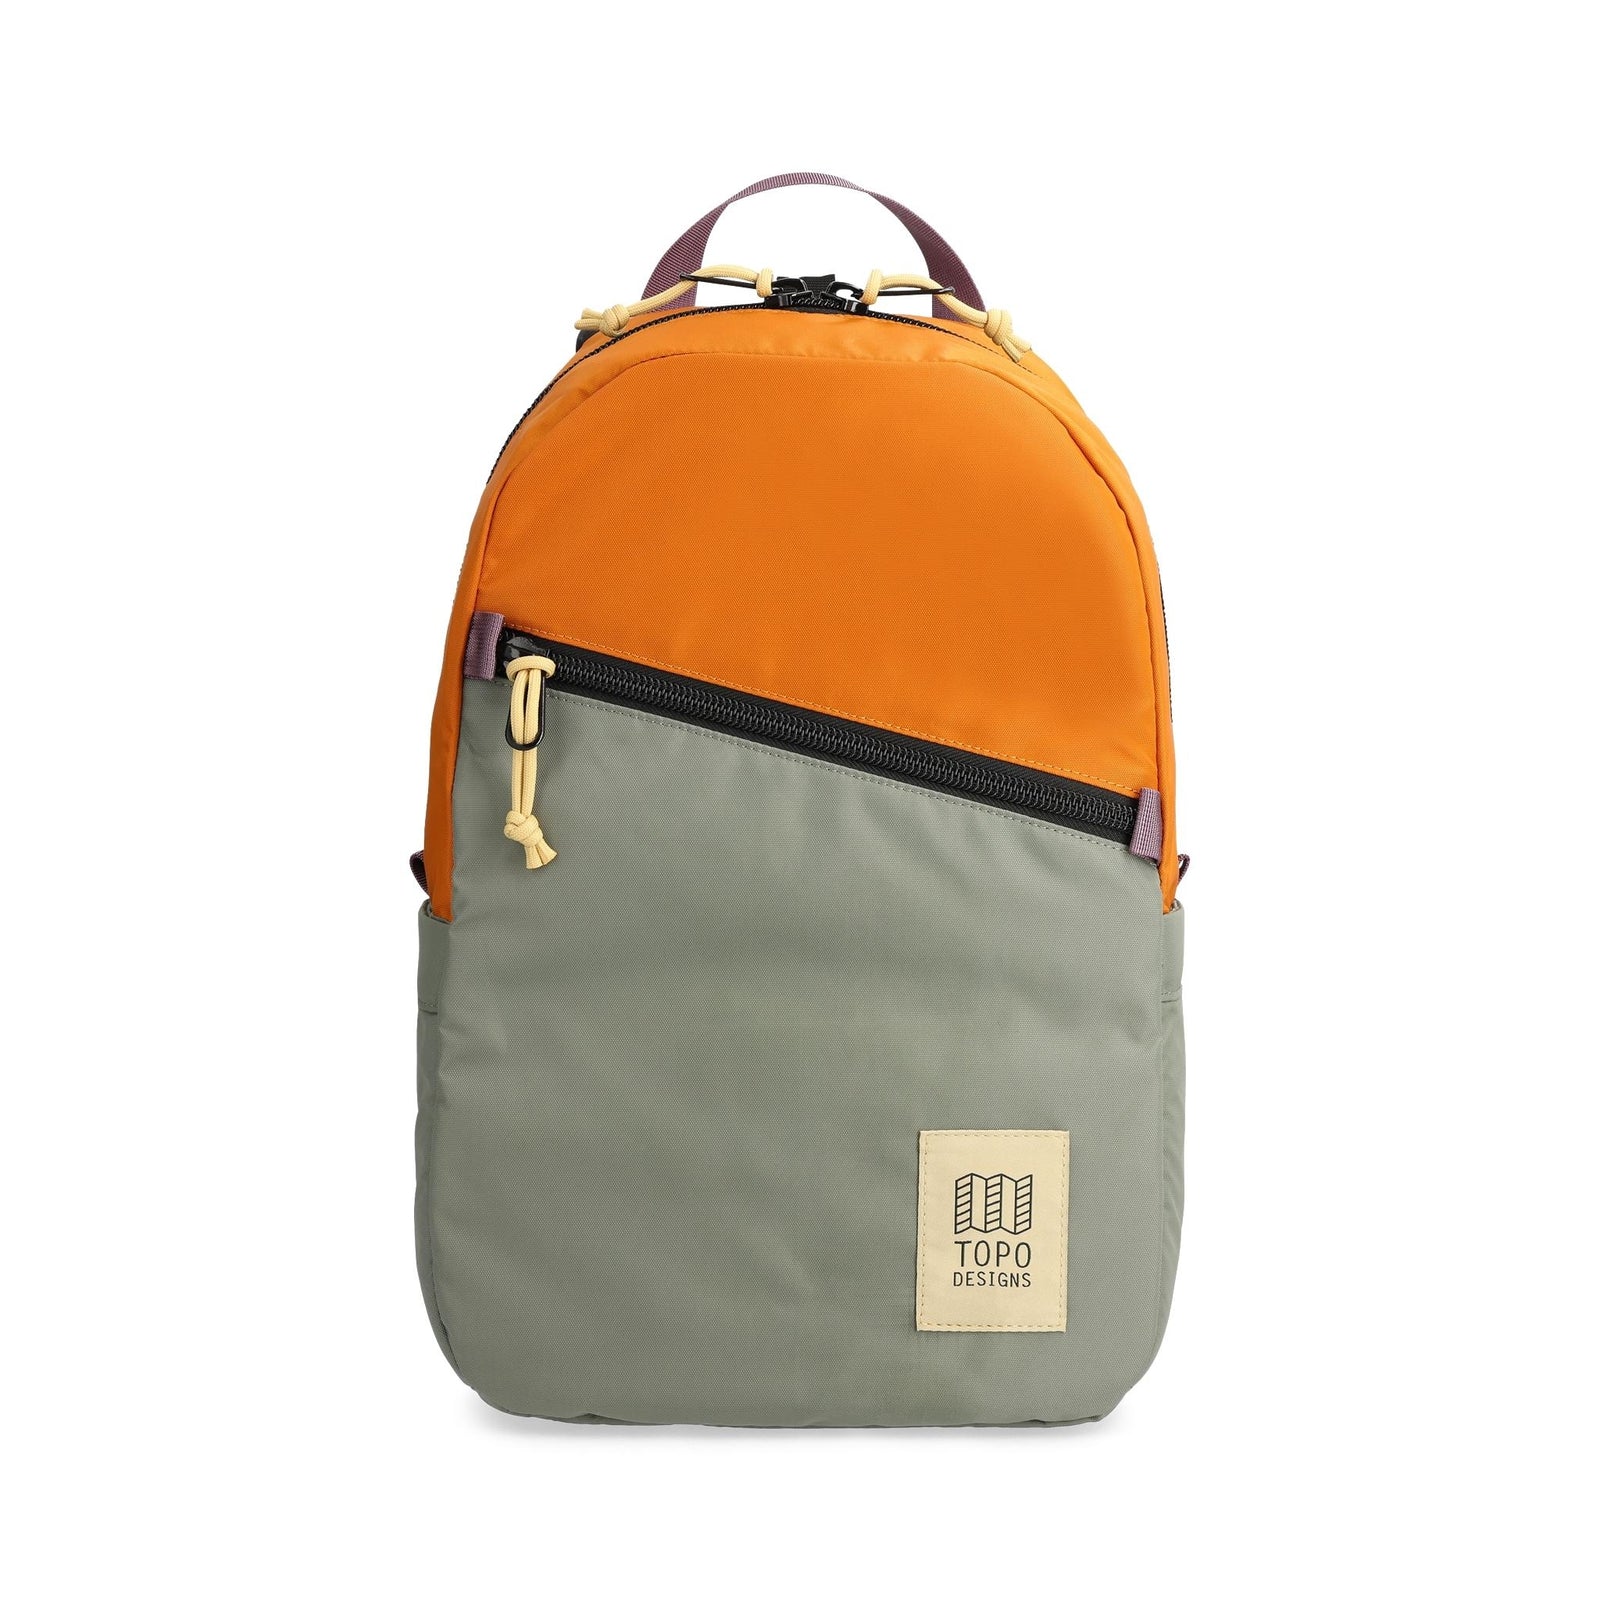 Front View of Topo Designs Light Pack in "Beetle / Spice"